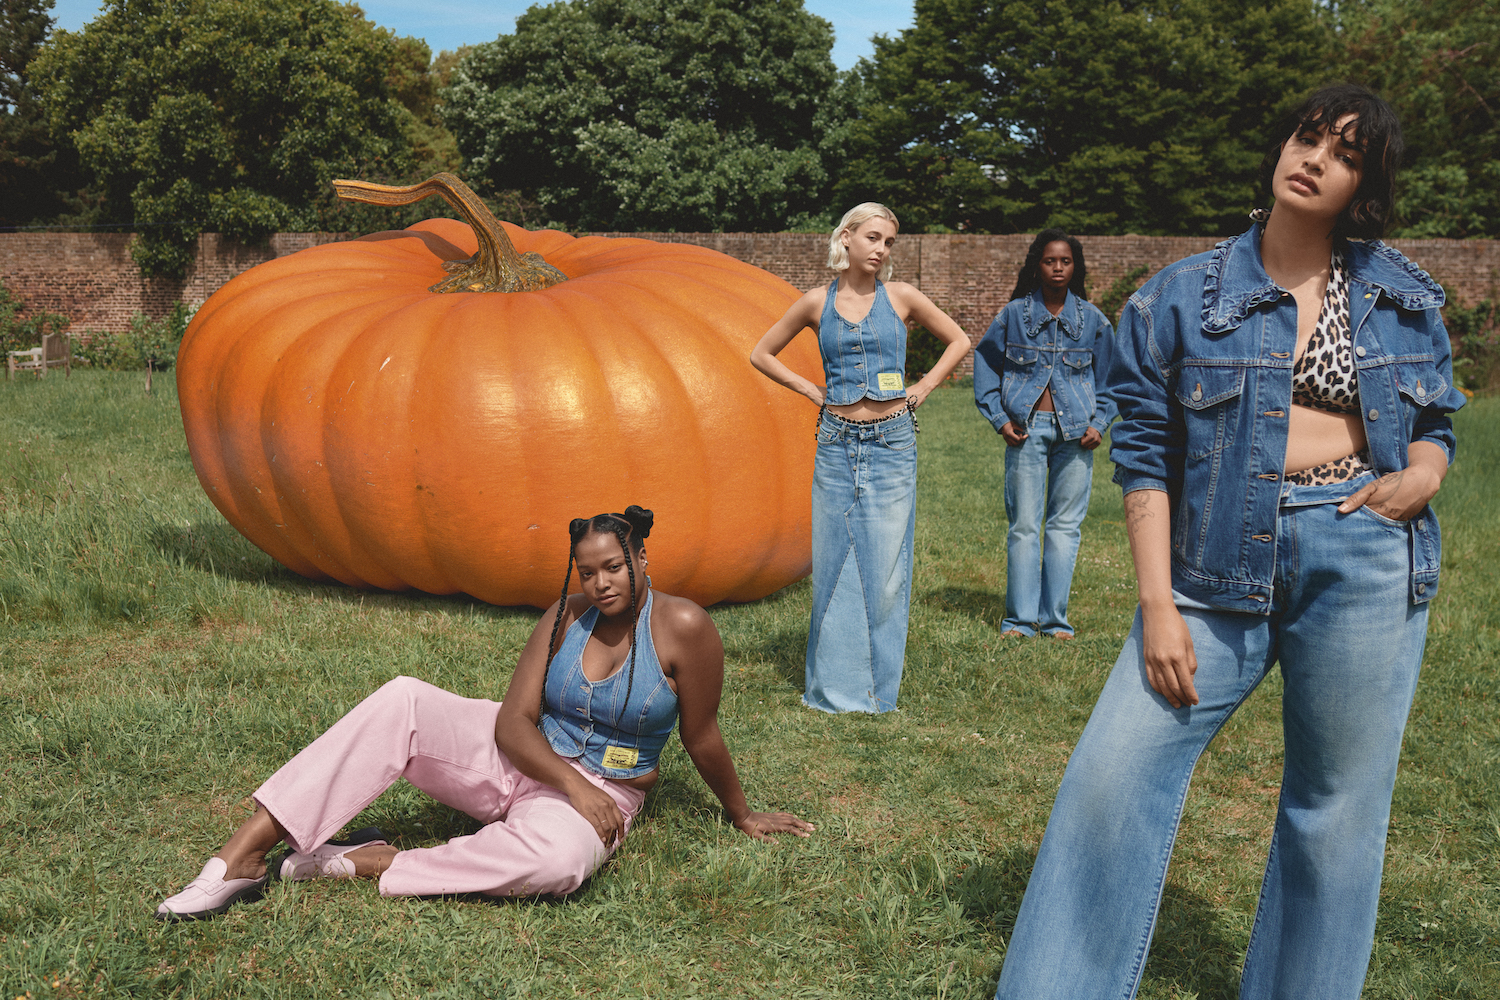 Emma Chamberlain and three other models wearing denim looks next to a giant pumpkin